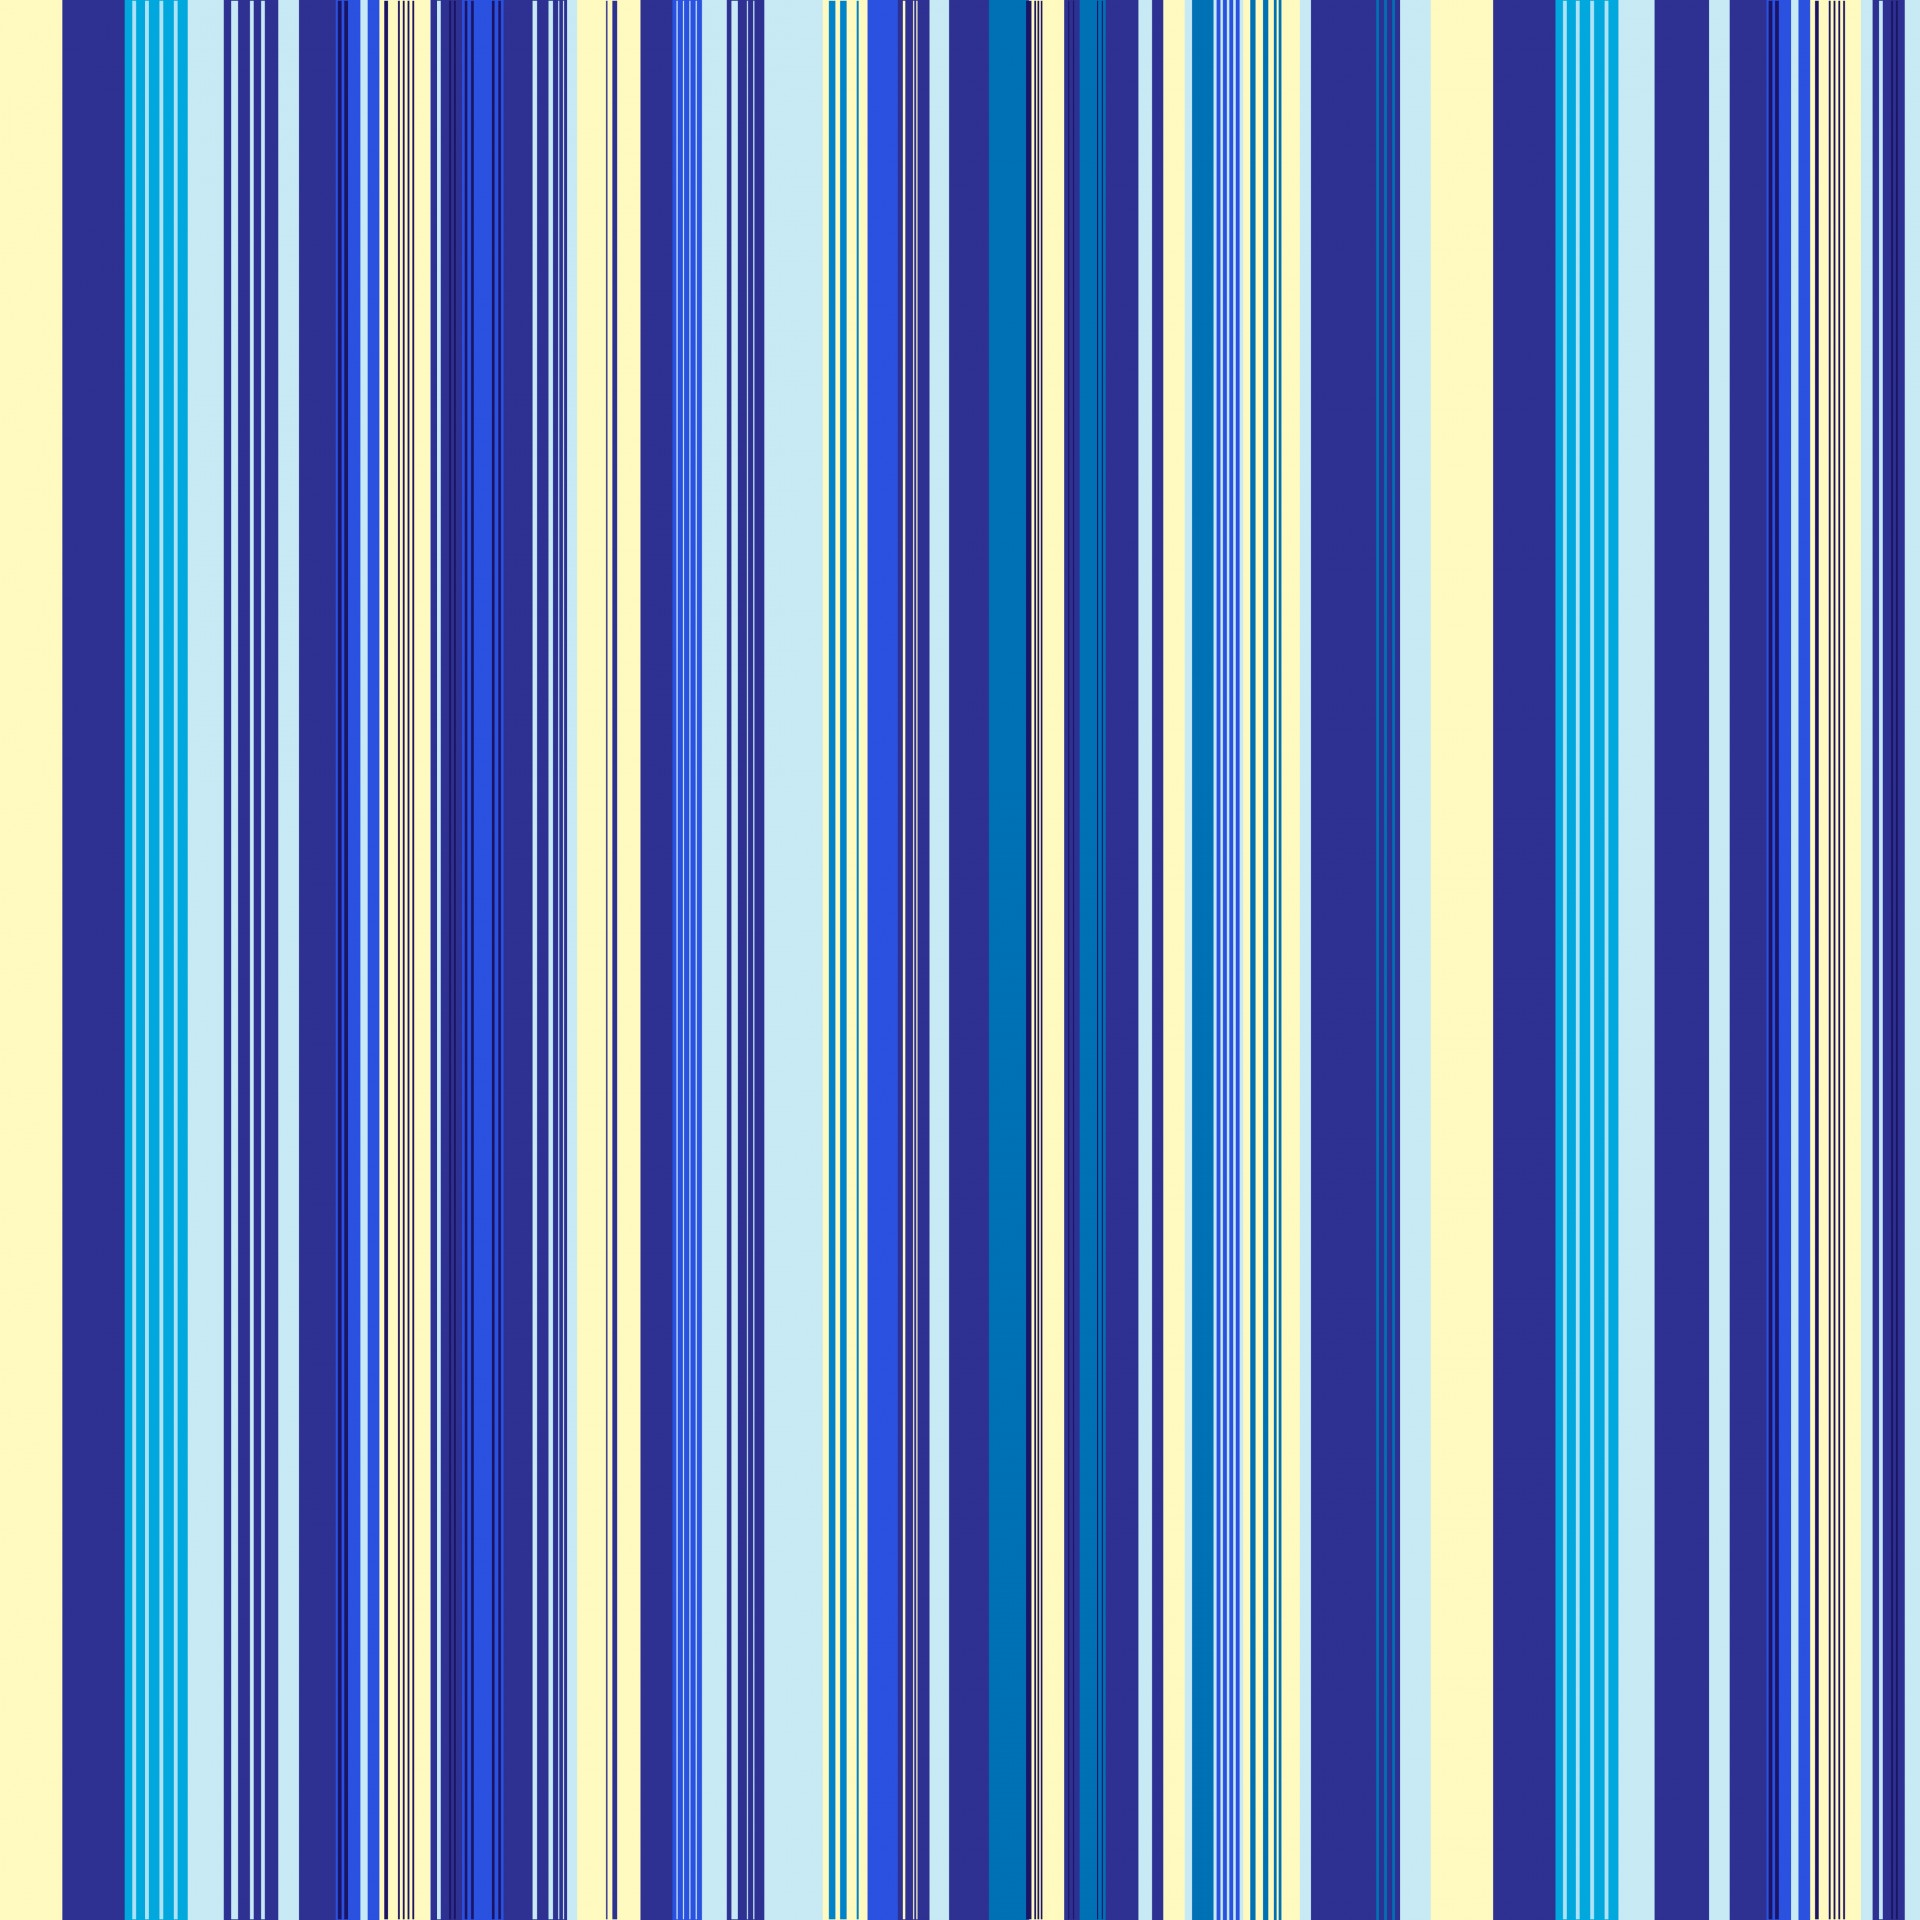 Download Free Photo Of Stripes Striped Blue Yellow Background From Needpix Com